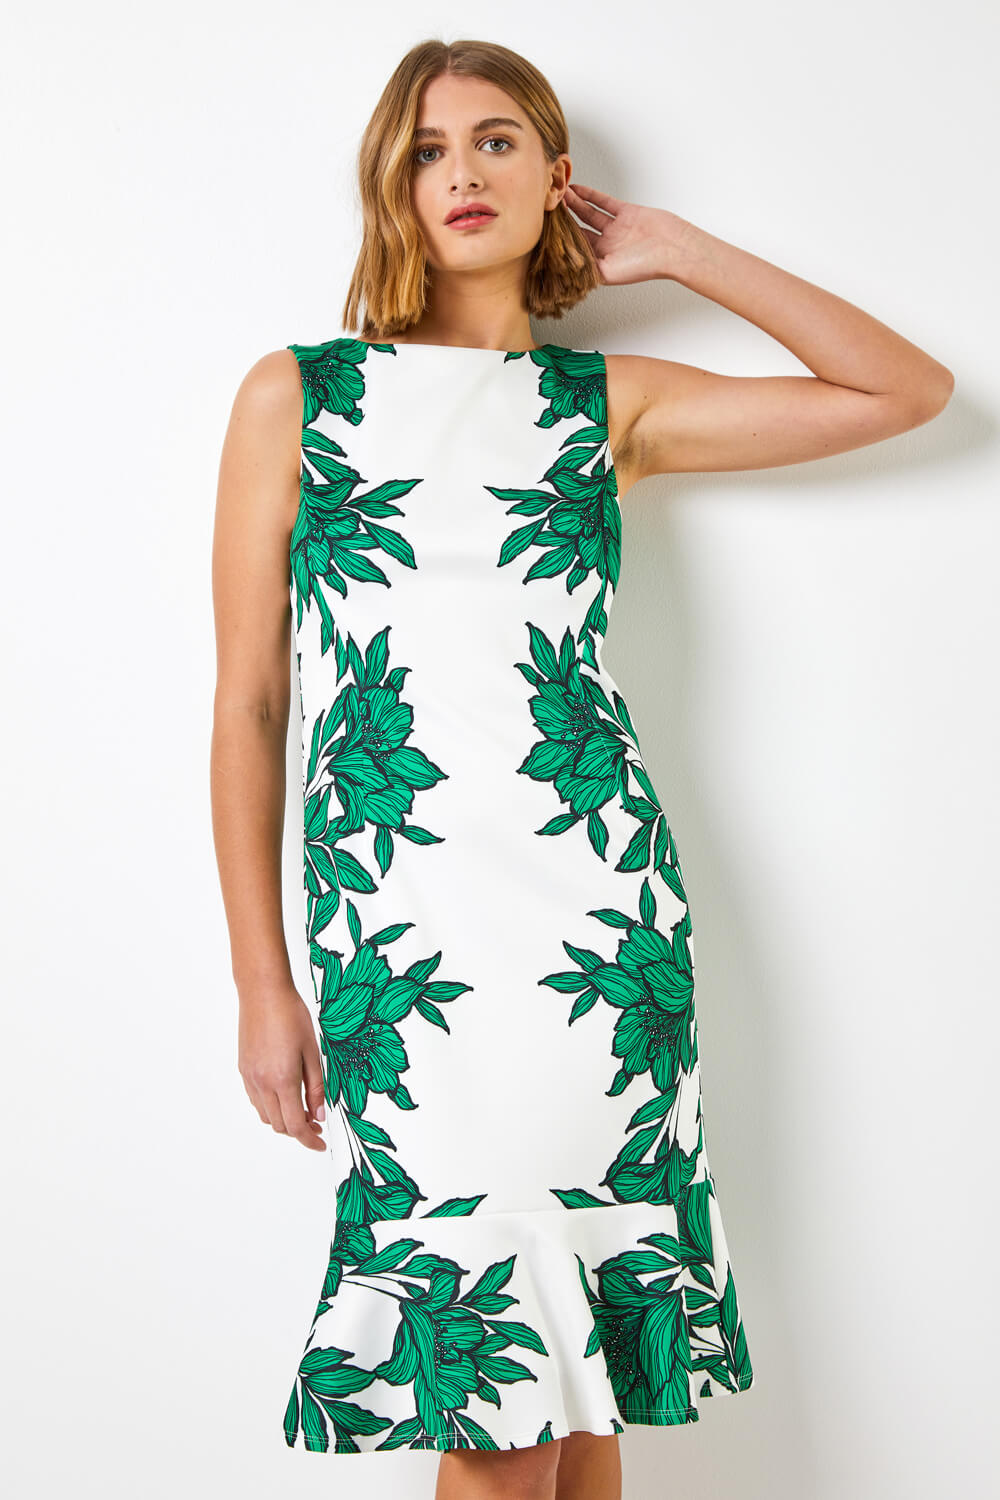 Green Floral Border Print Frill Stretch Dress, Image 3 of 4